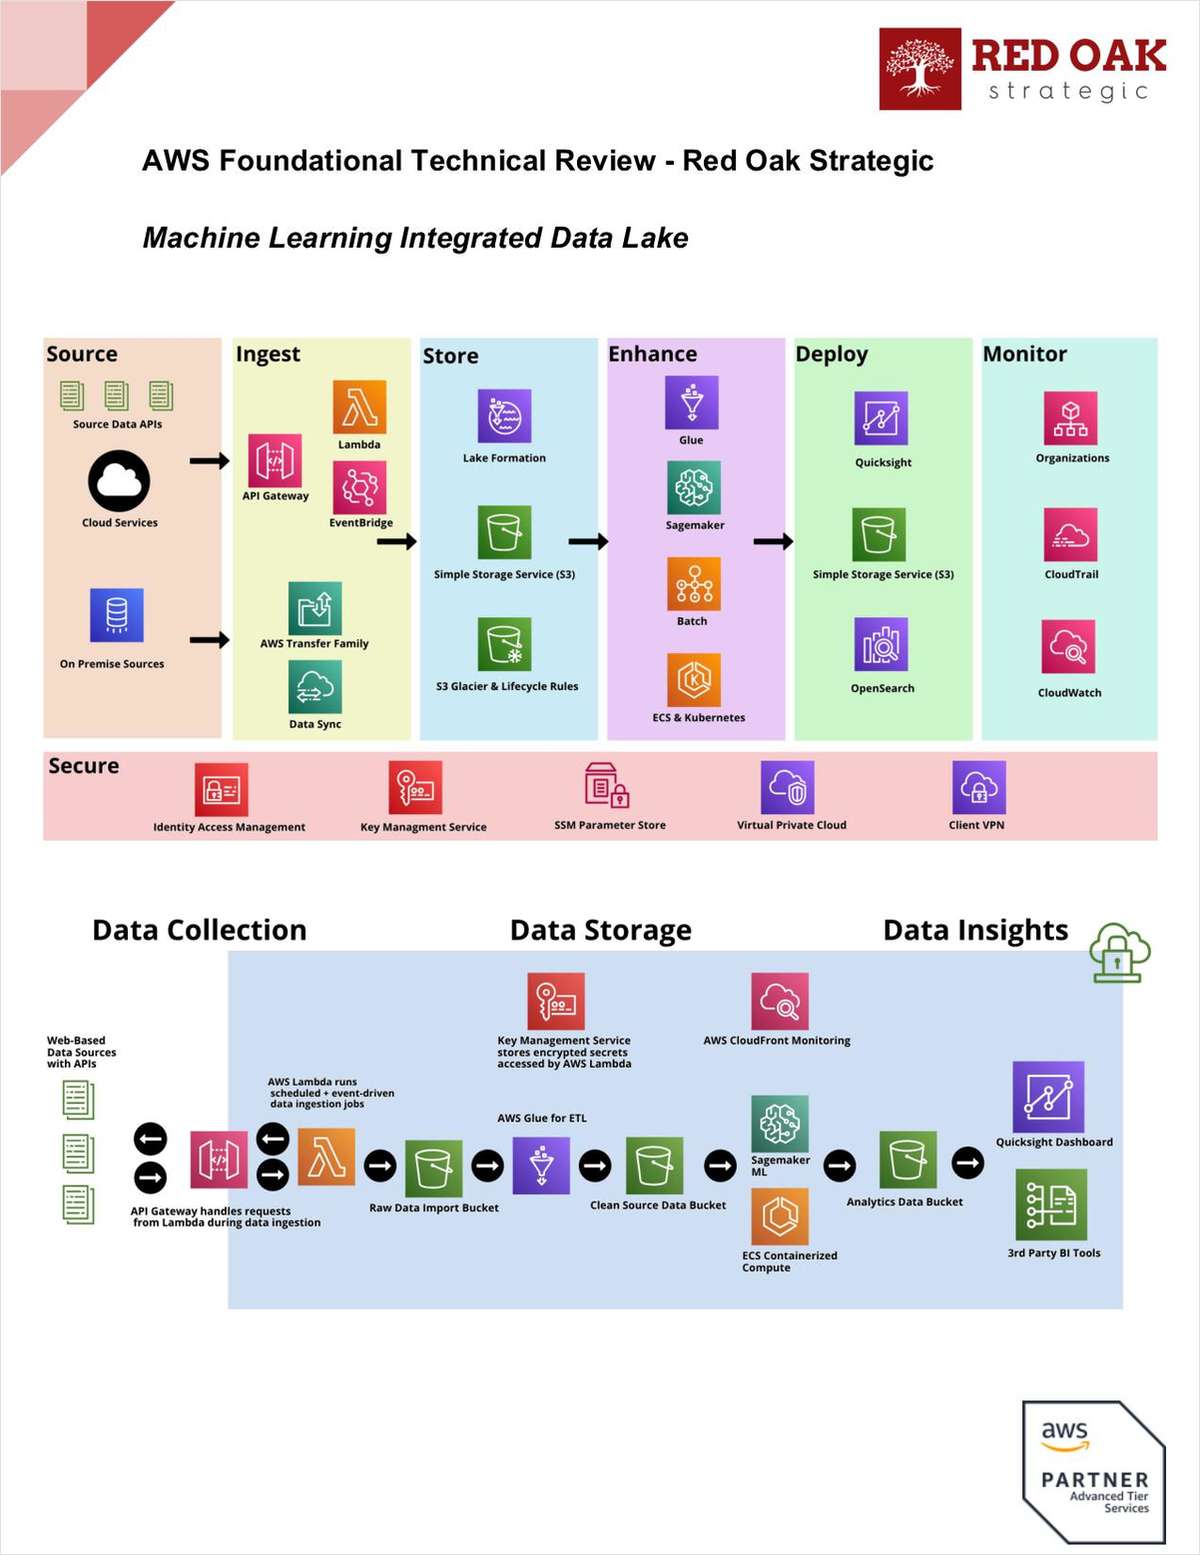 AWS Foundational Technical Review - Machine Learning Integrated Data Lake